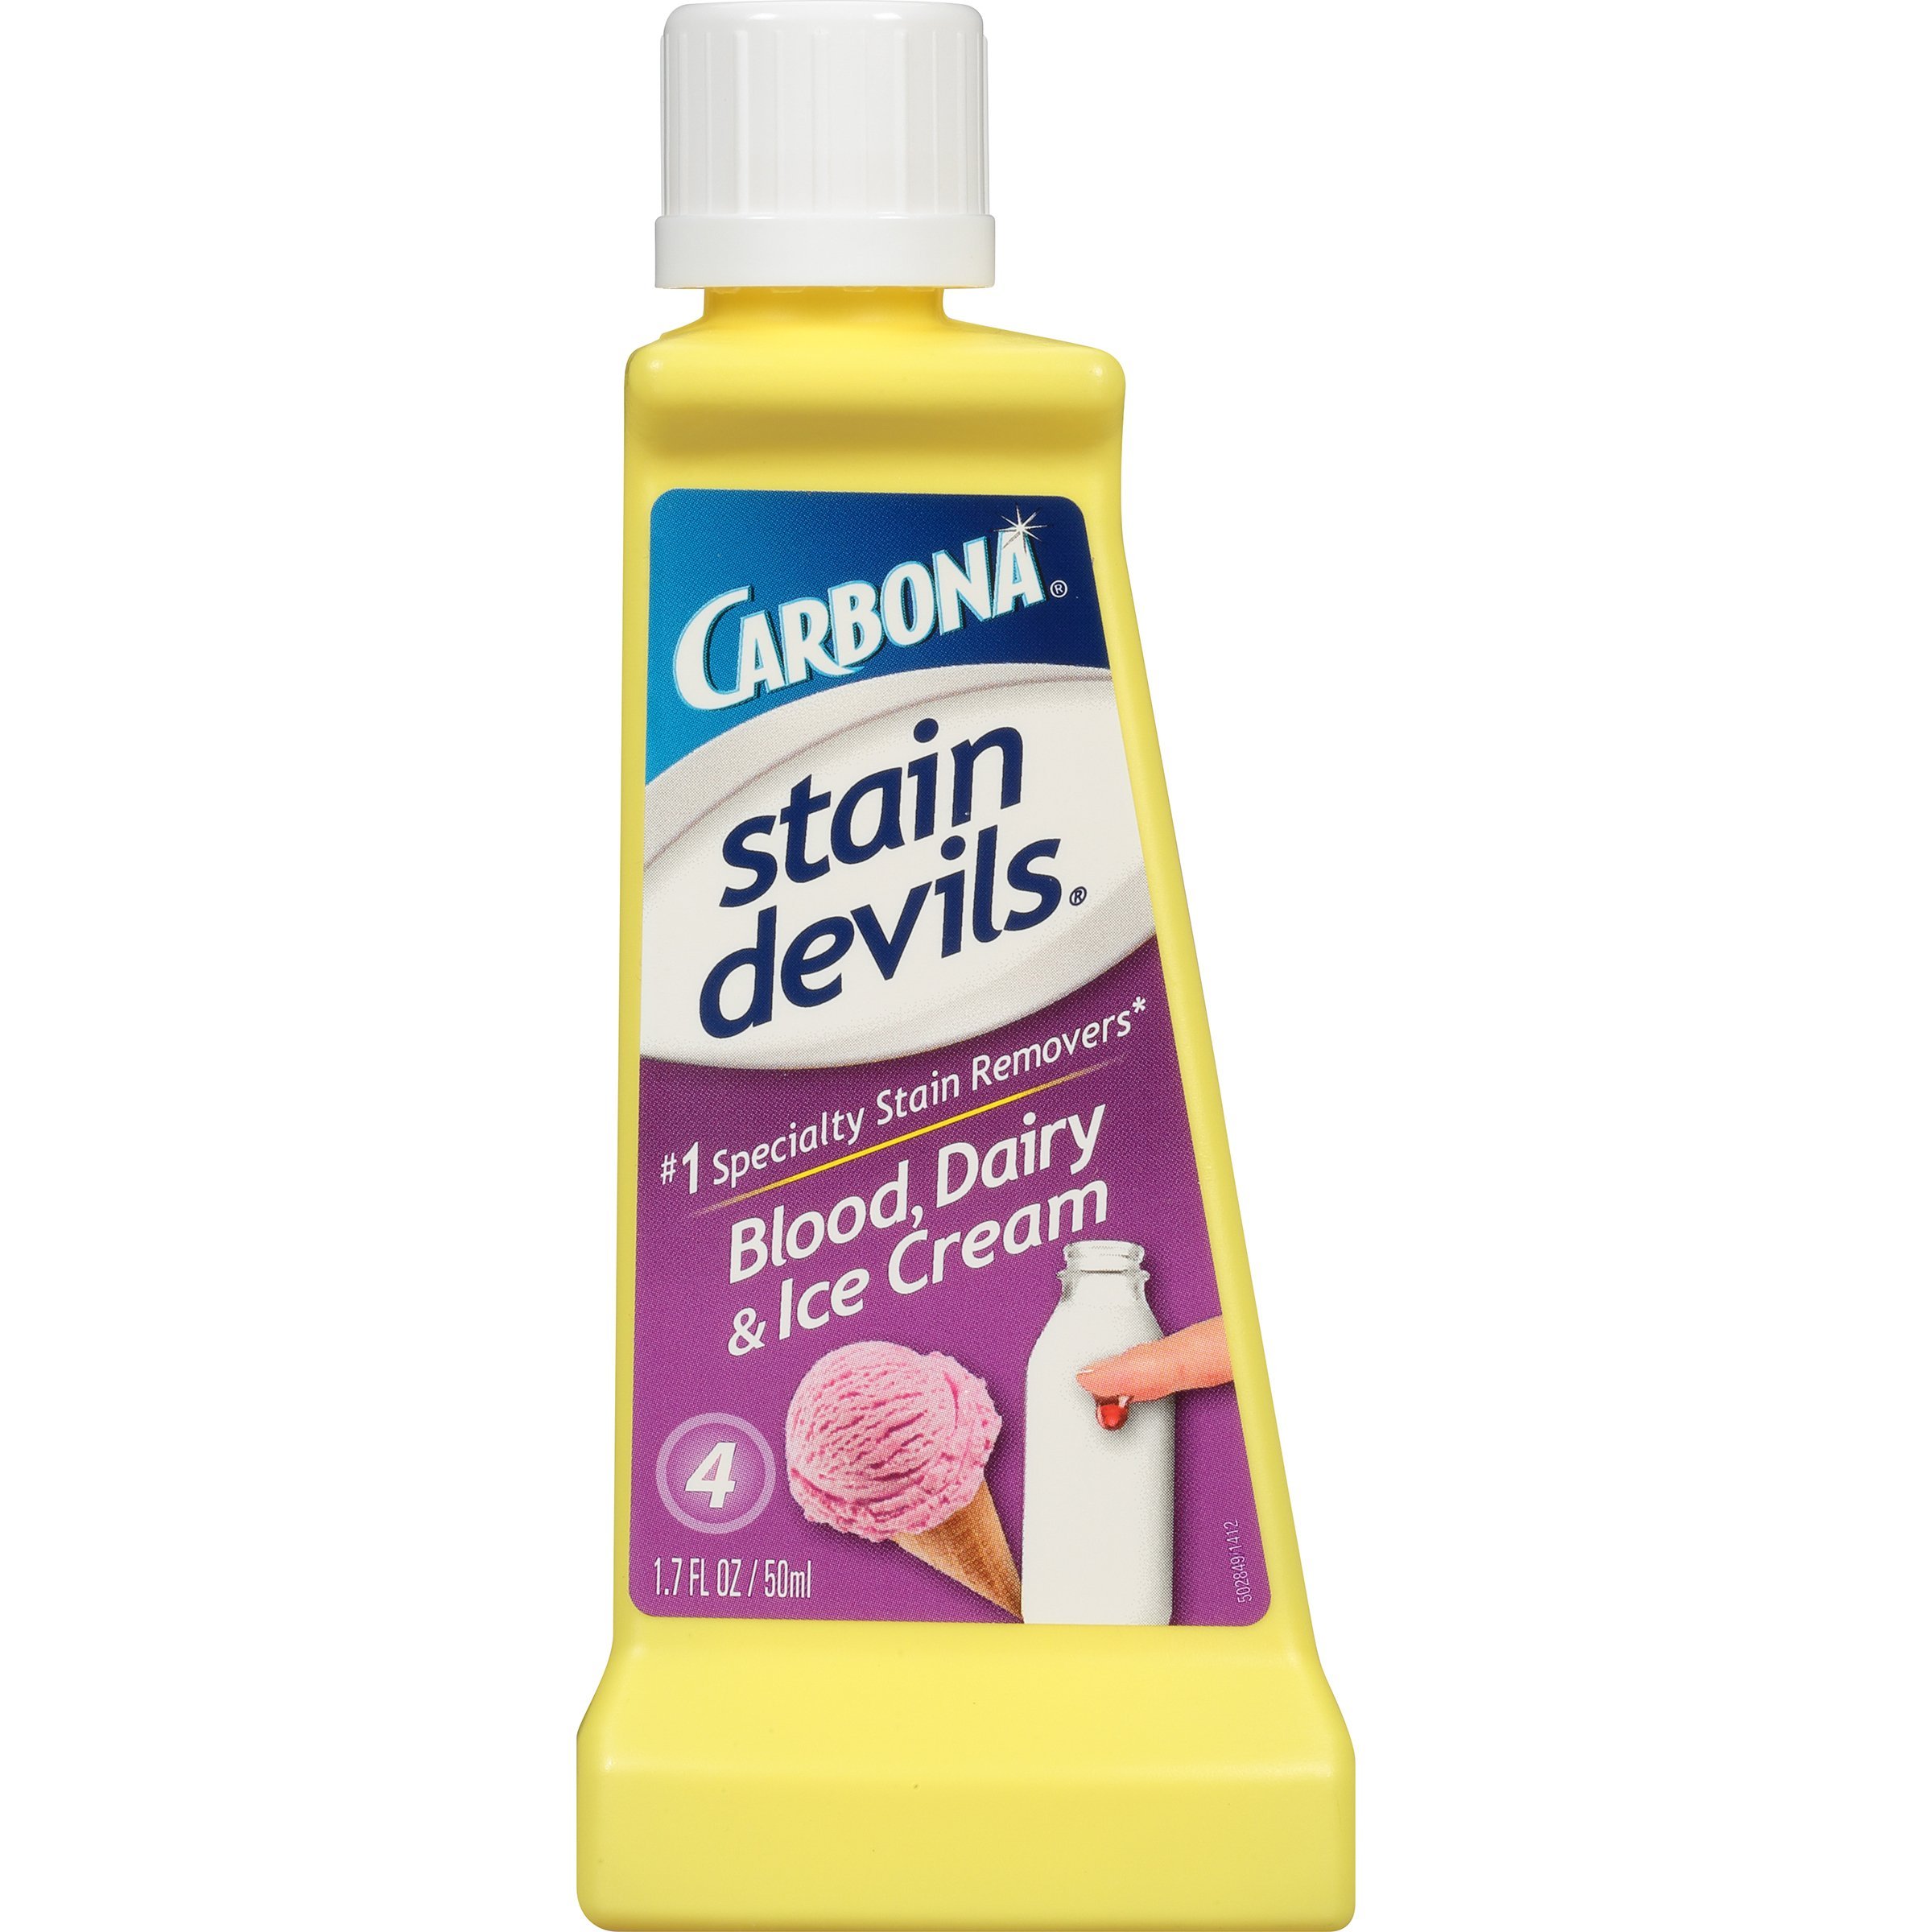  Carbona Stain Devils® #4 – Blood, Dairy & Ice Cream, Professional Strength Laundry Stain Remover, Multi-Fabric Cleaner, Safe  On Skin & Washable Fabrics